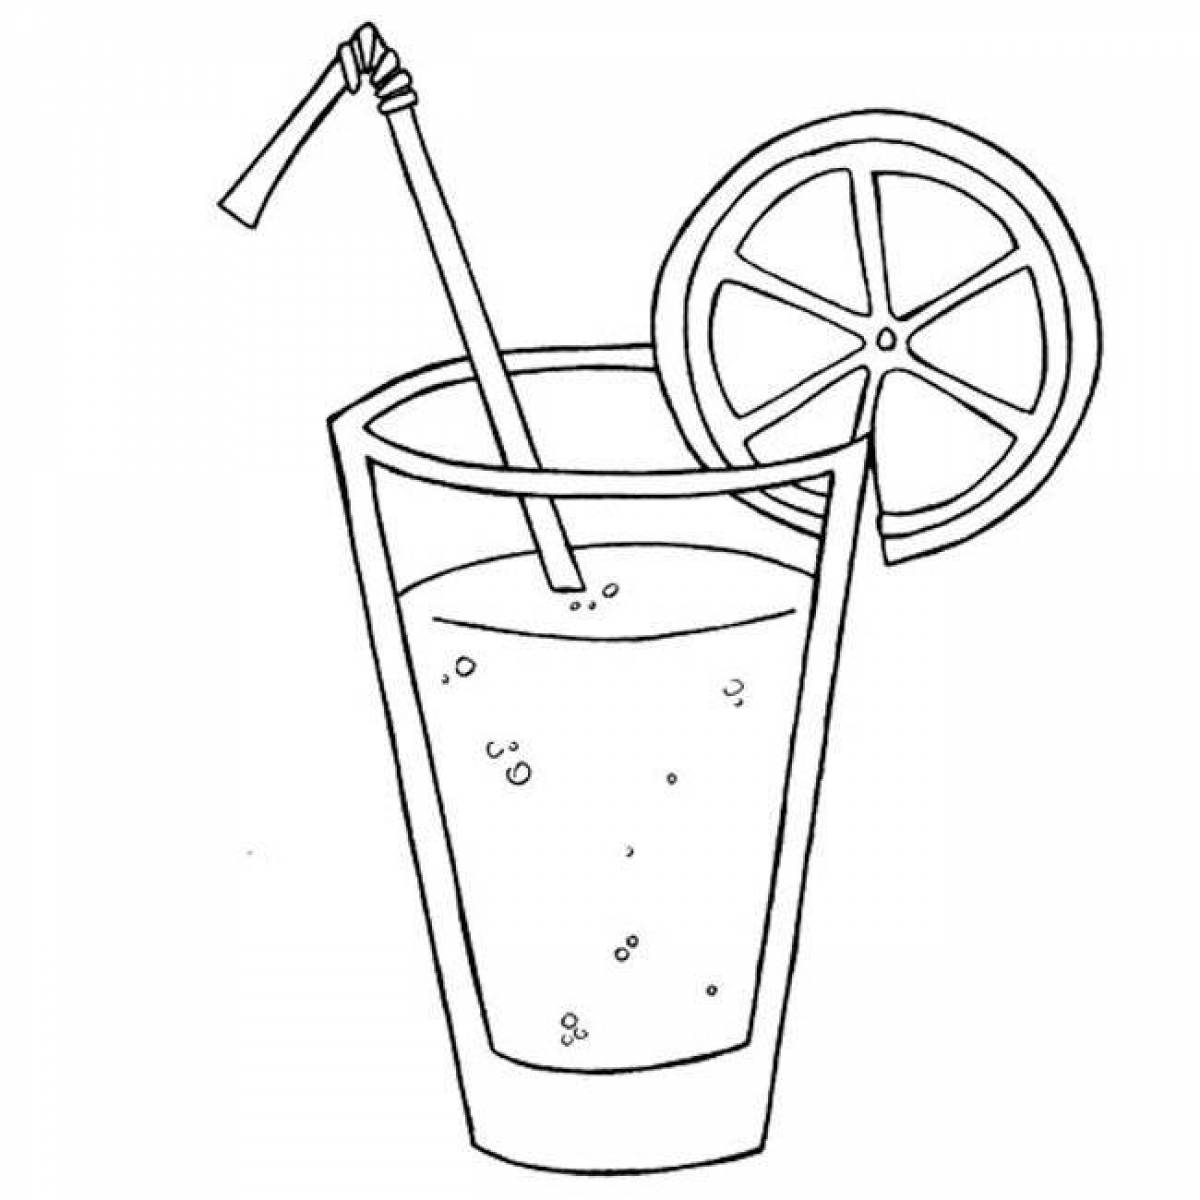 Sparkling drink coloring page